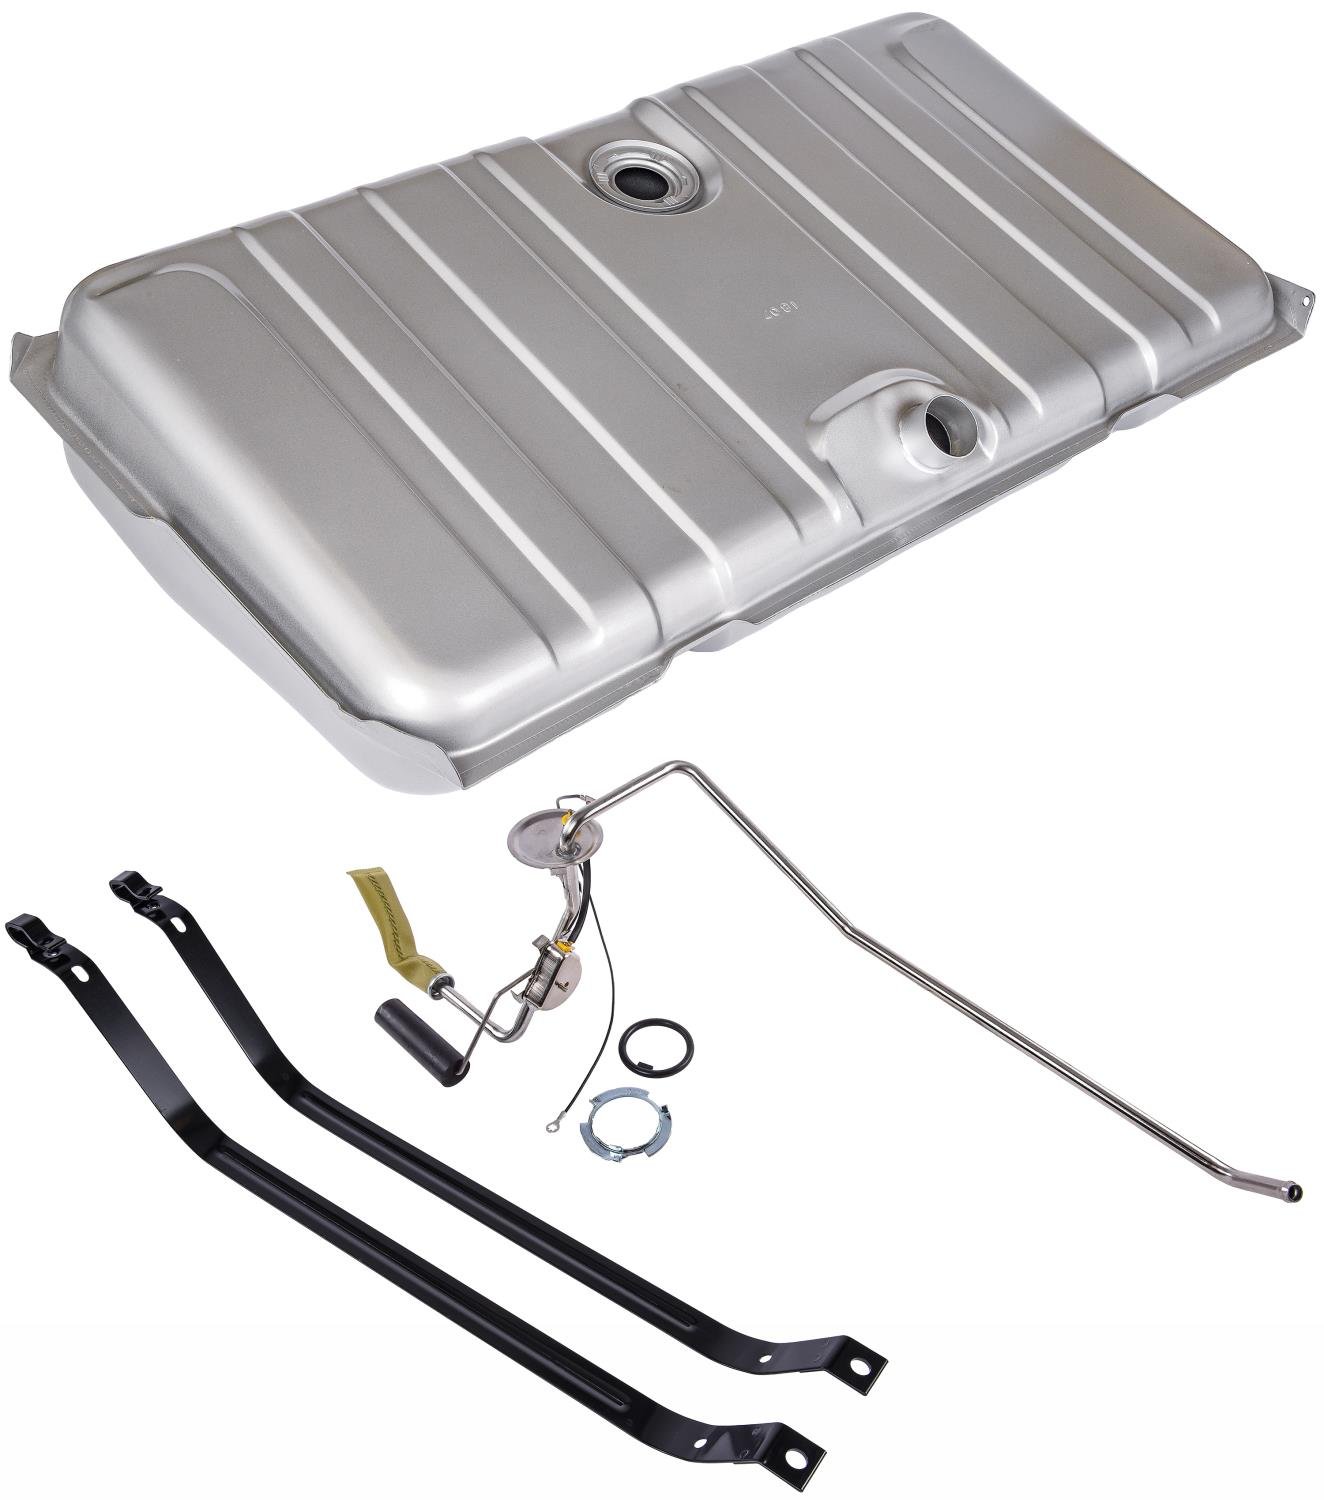 Fuel Tank Kit with Straps & Sending Unit for 1967-1968 Camaro and Firebird [18-Gallon]